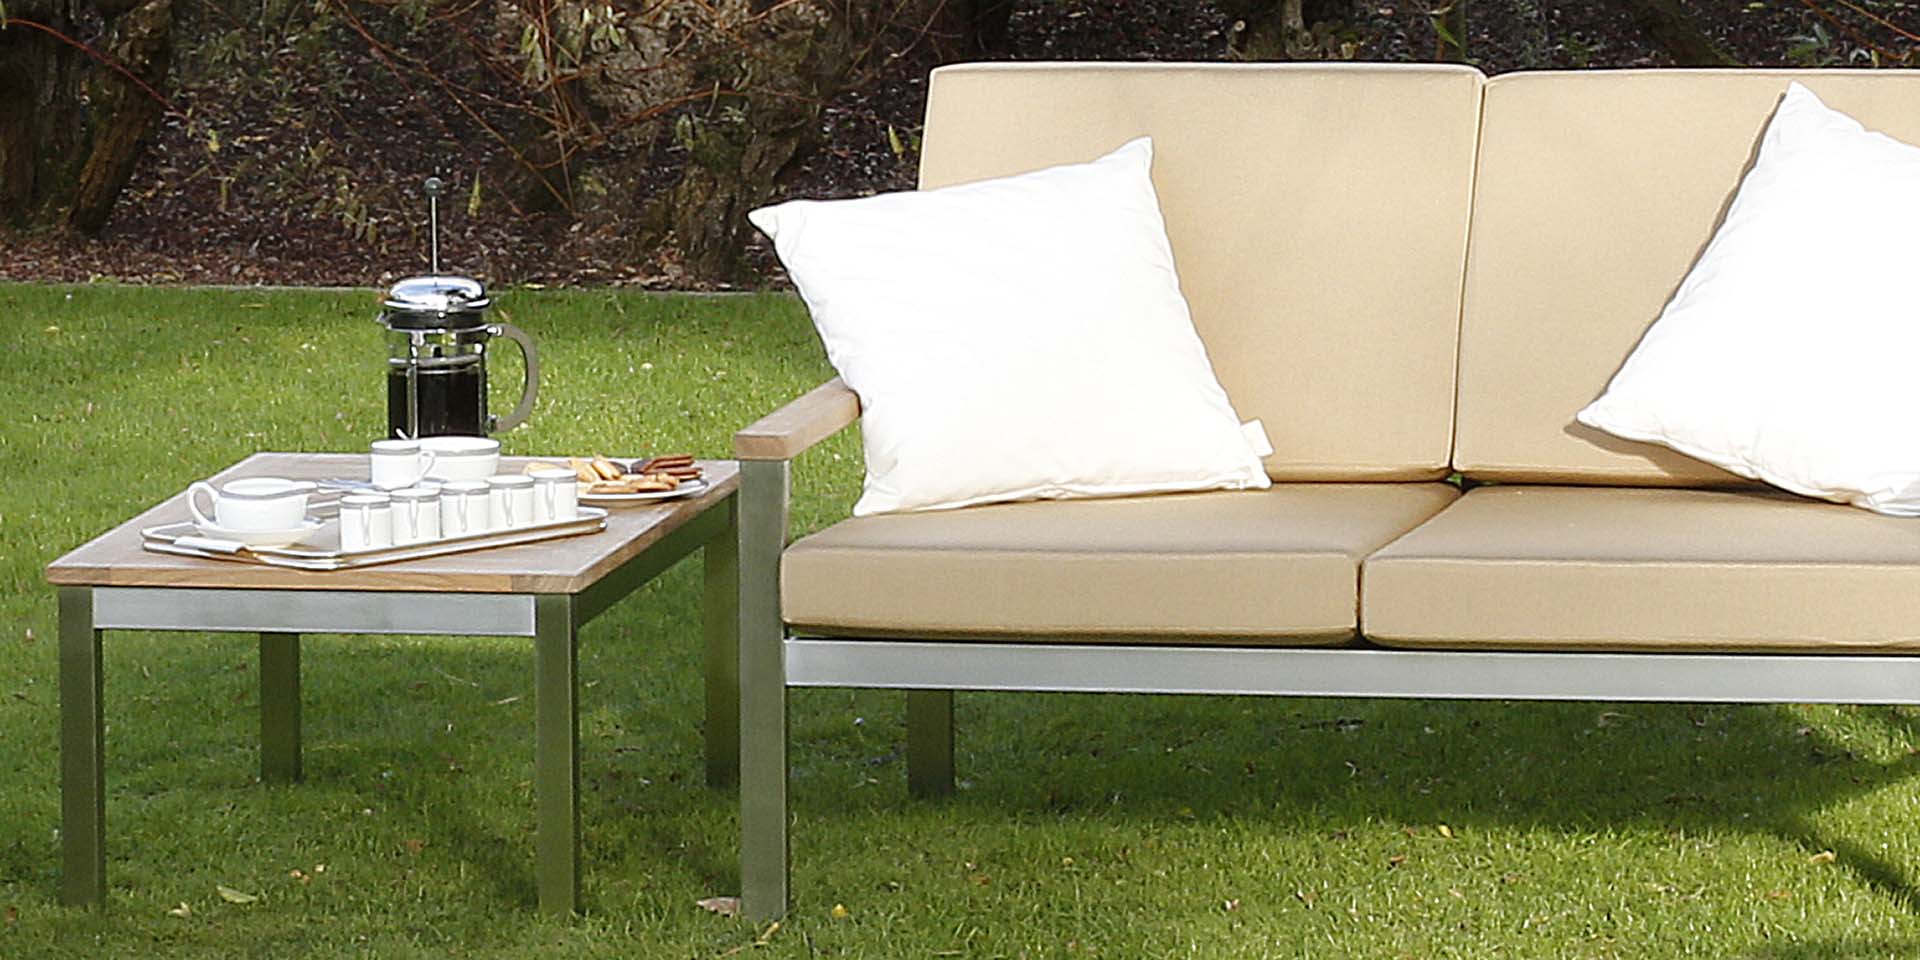 Equinox Occasional Deep Seating Two-seater Settee - Powder coated